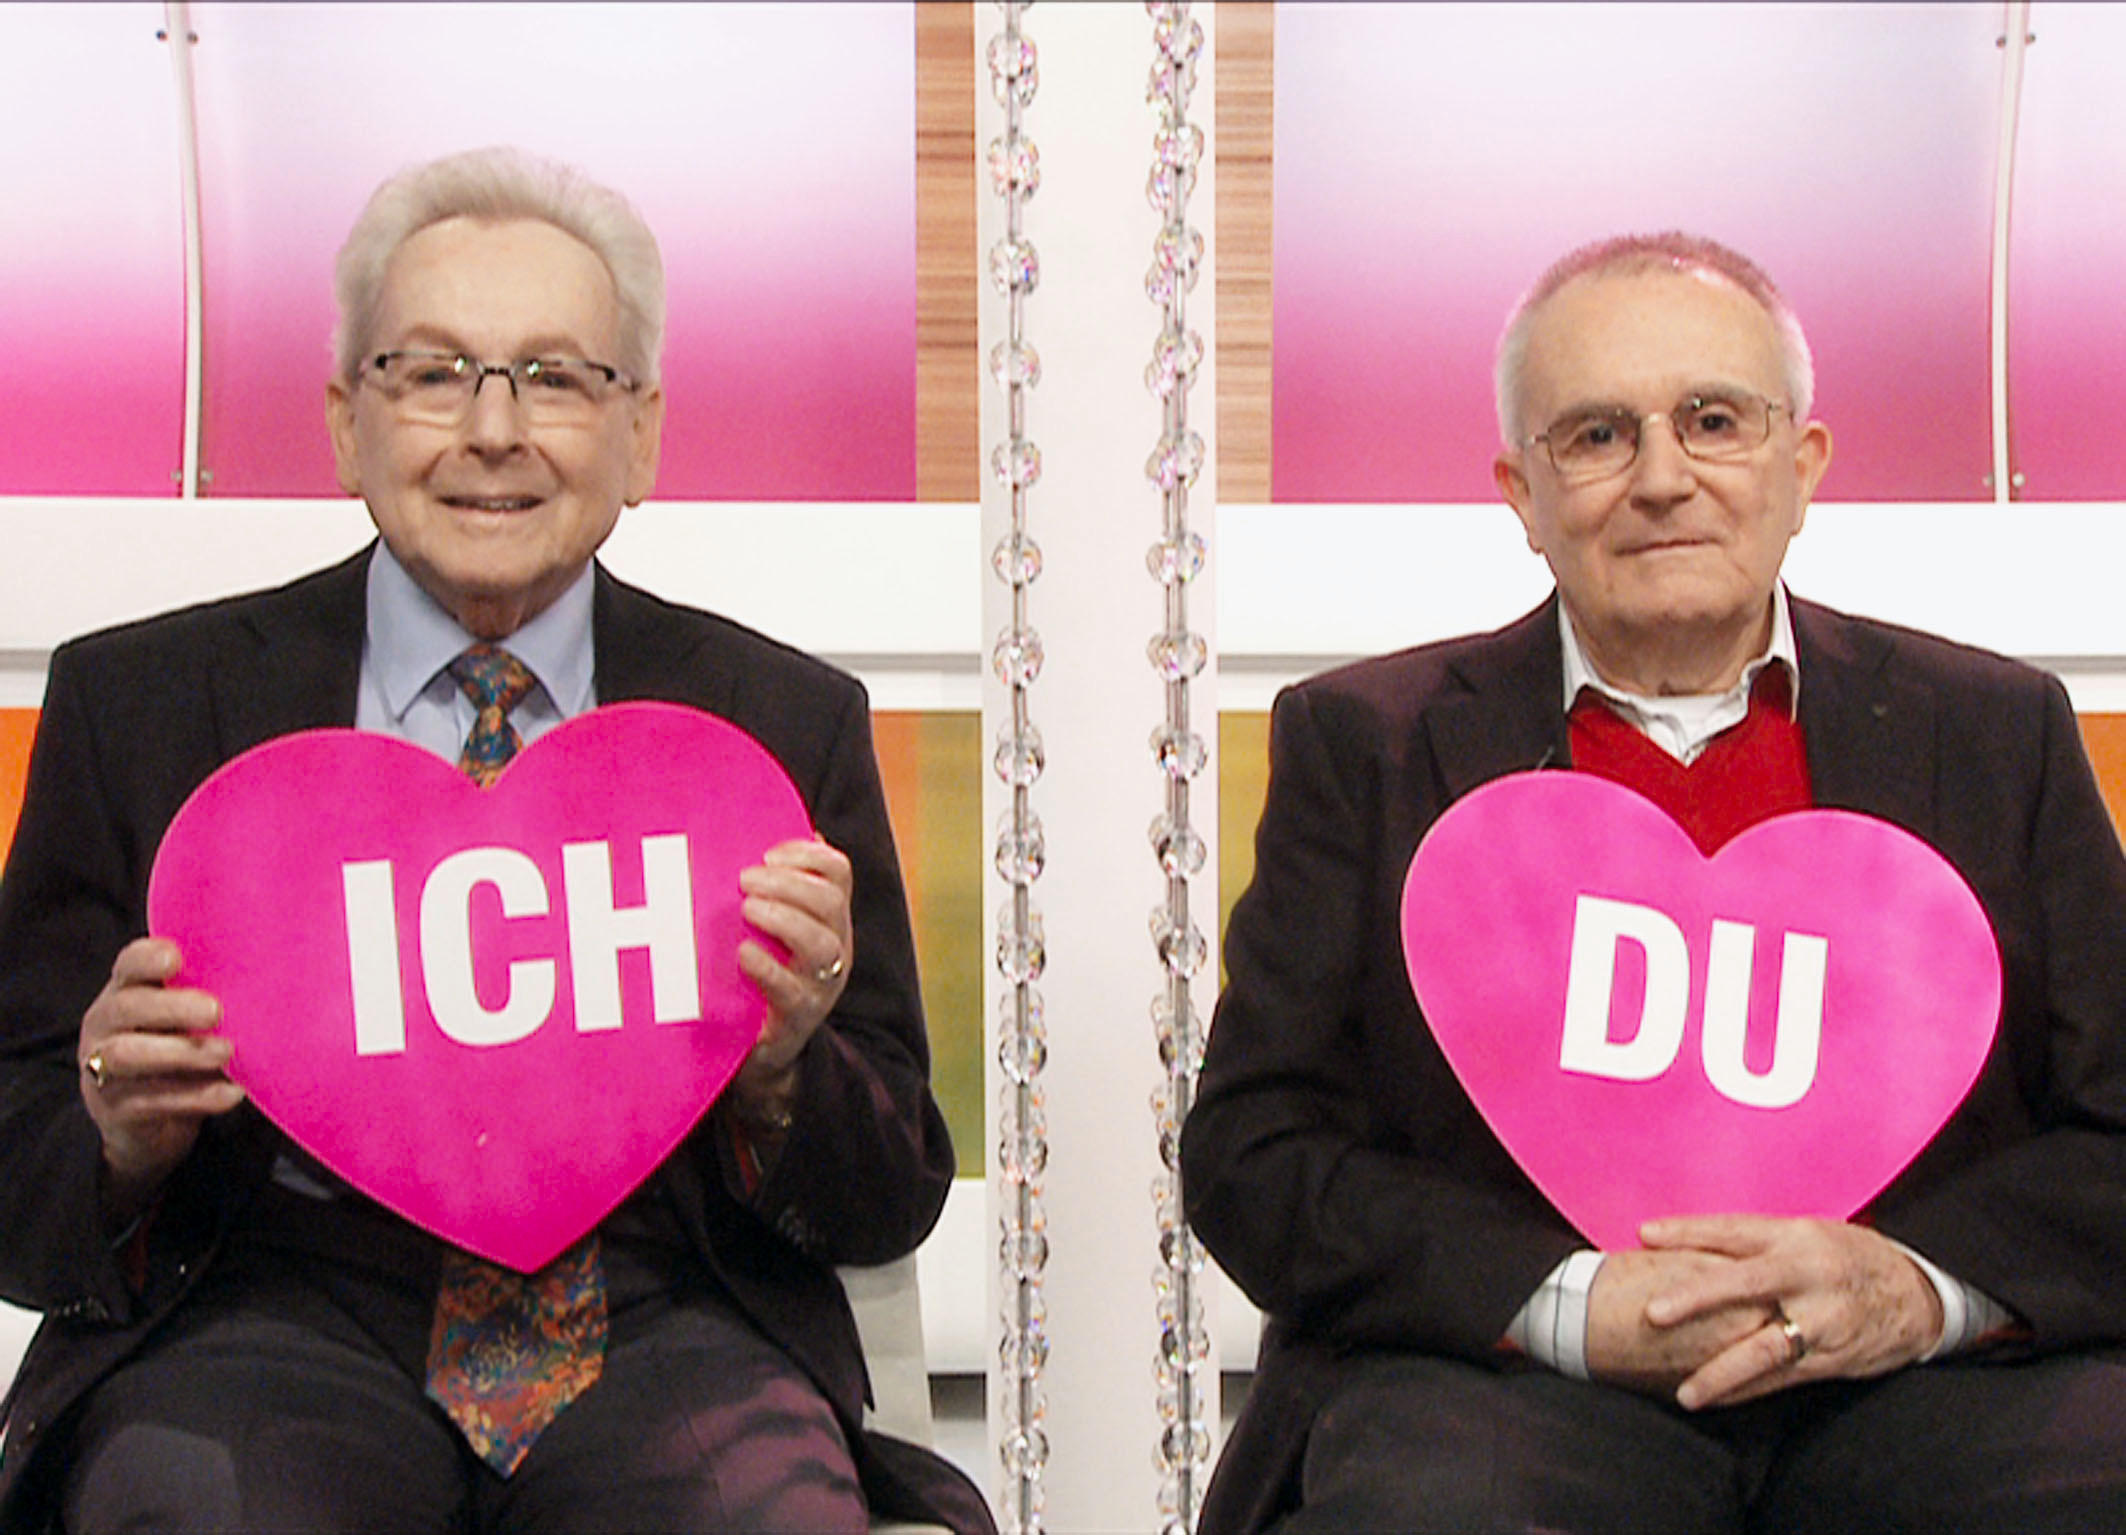 Two men hold heart-shaped signs